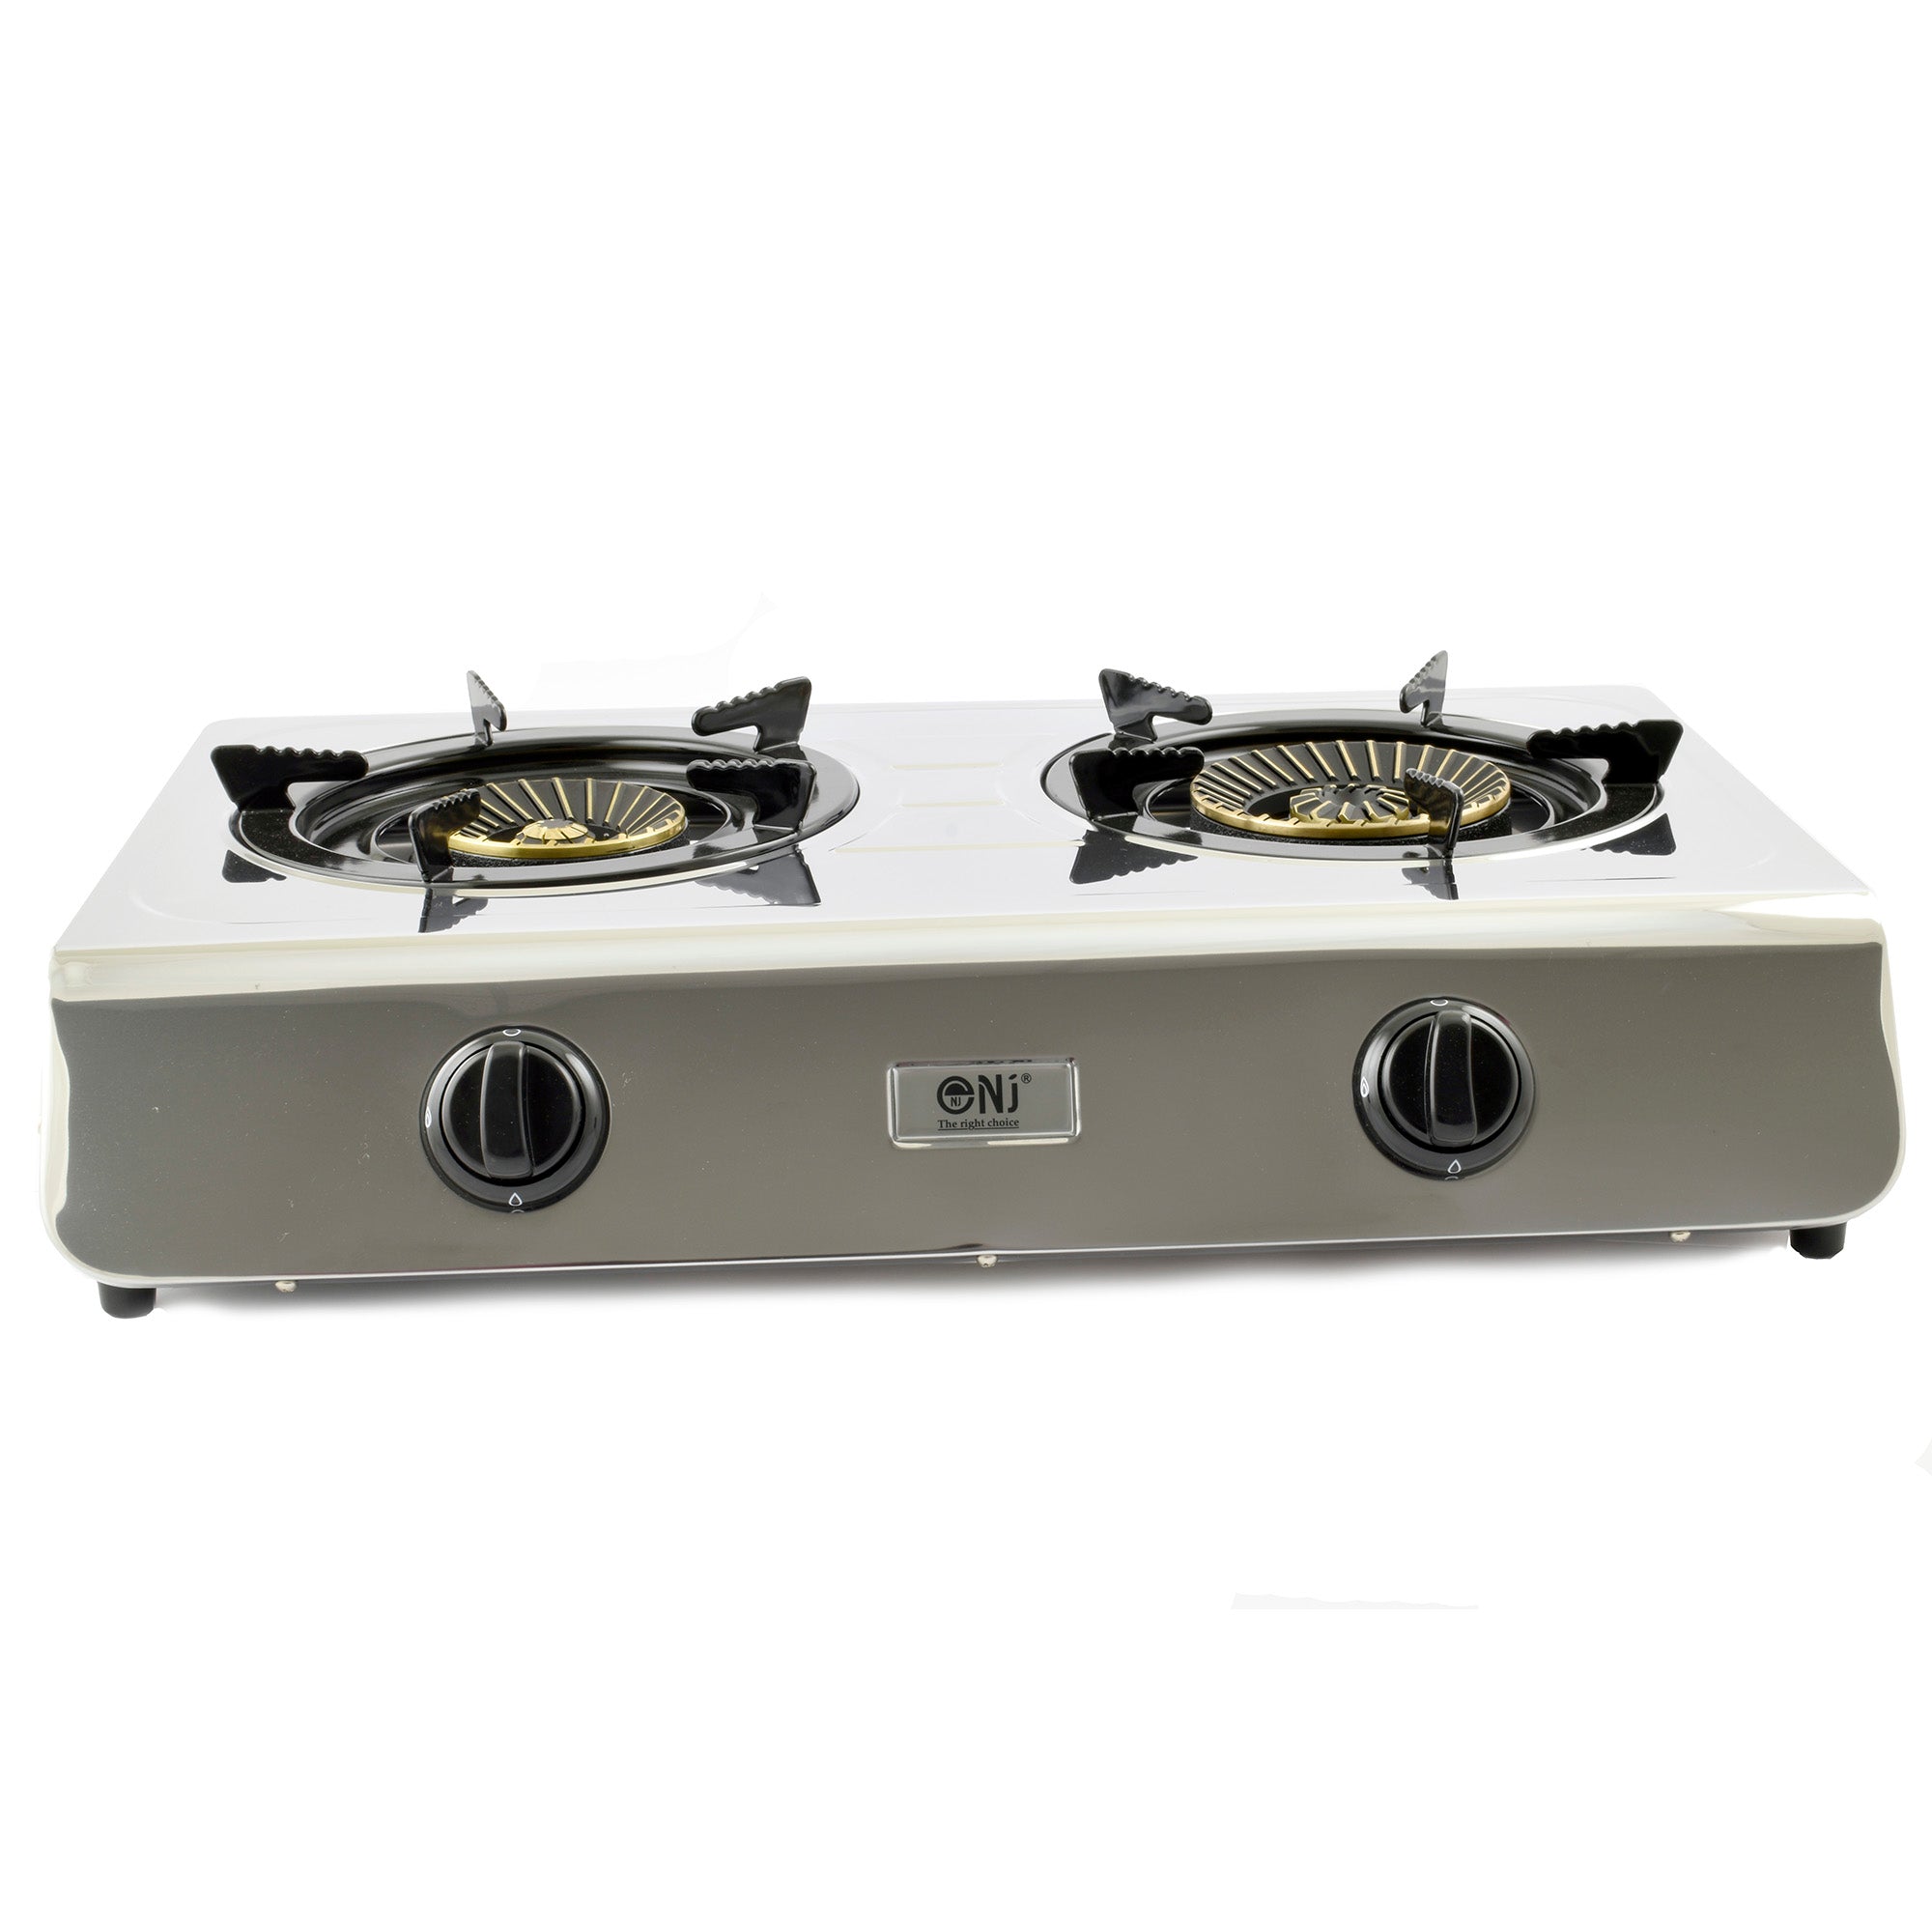 Stoves SEC60DO Electric Cooker with Ceramic Hob - Stainless Steel - Home  Needs Appliances